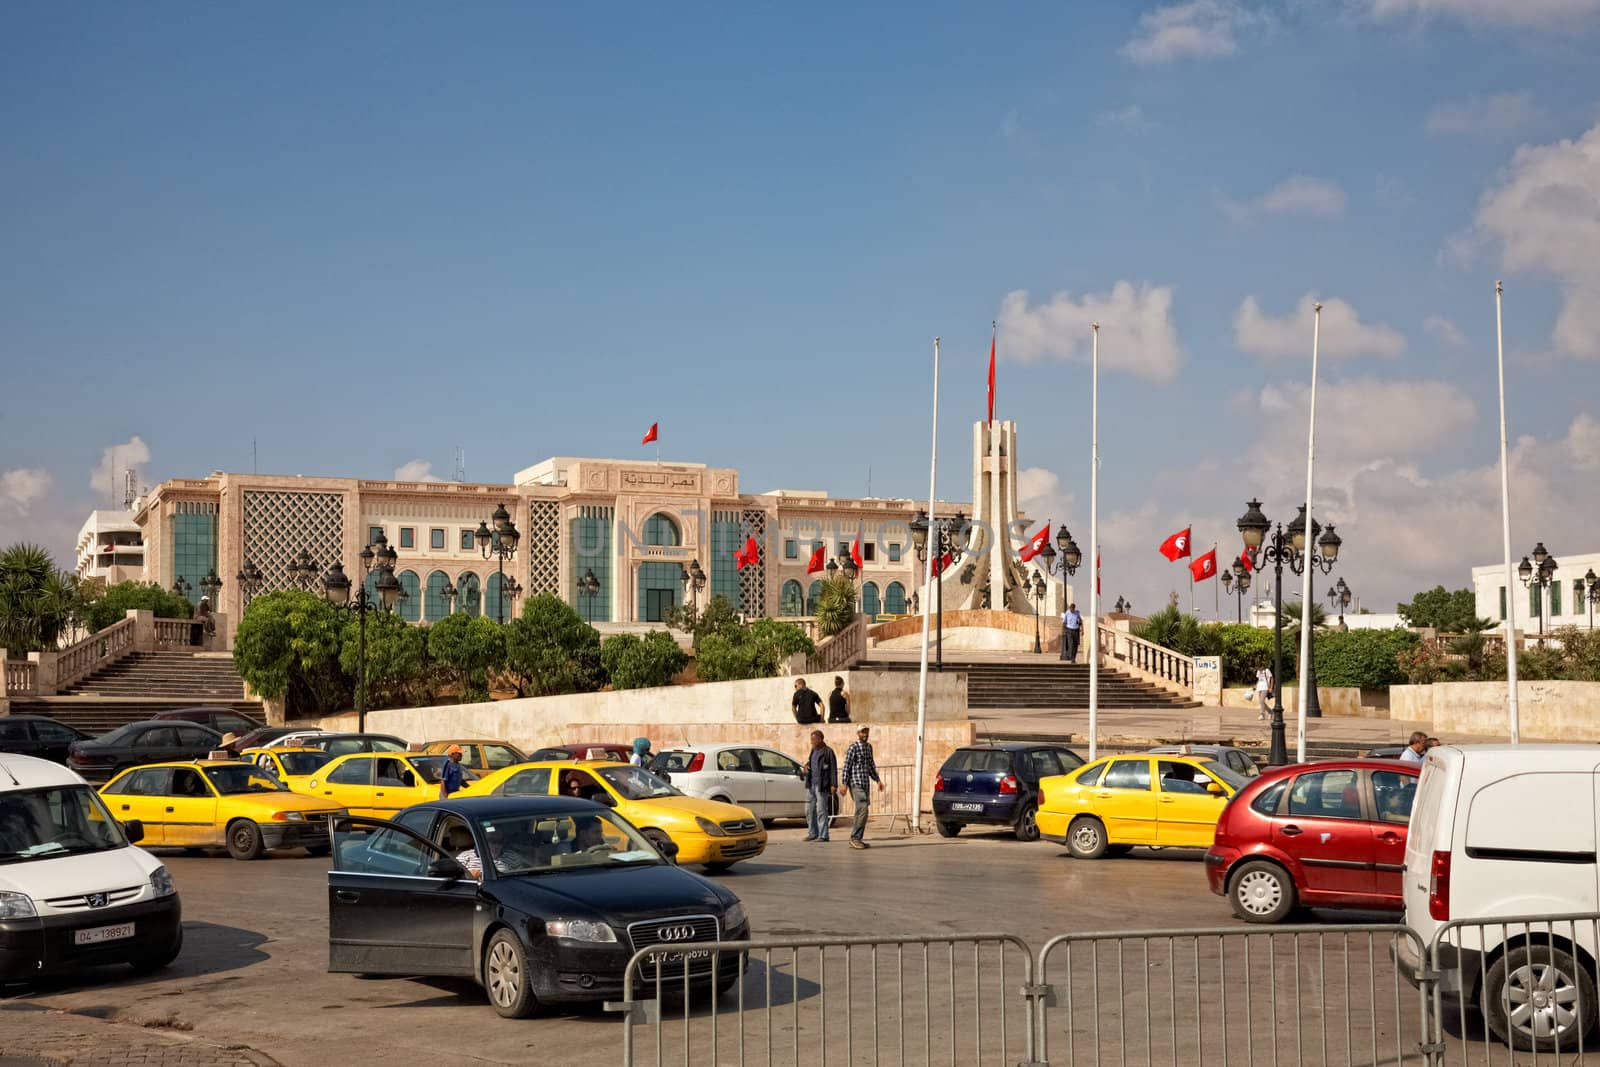 TUNIS, TUNISIA - OCTOBER 5: Heavy traffic close to city hall of Tunis due to higher security measures before elections on October 5, 2011 in Tunis. On October 23 Tunisians are set to vote for a constitutional assembly.